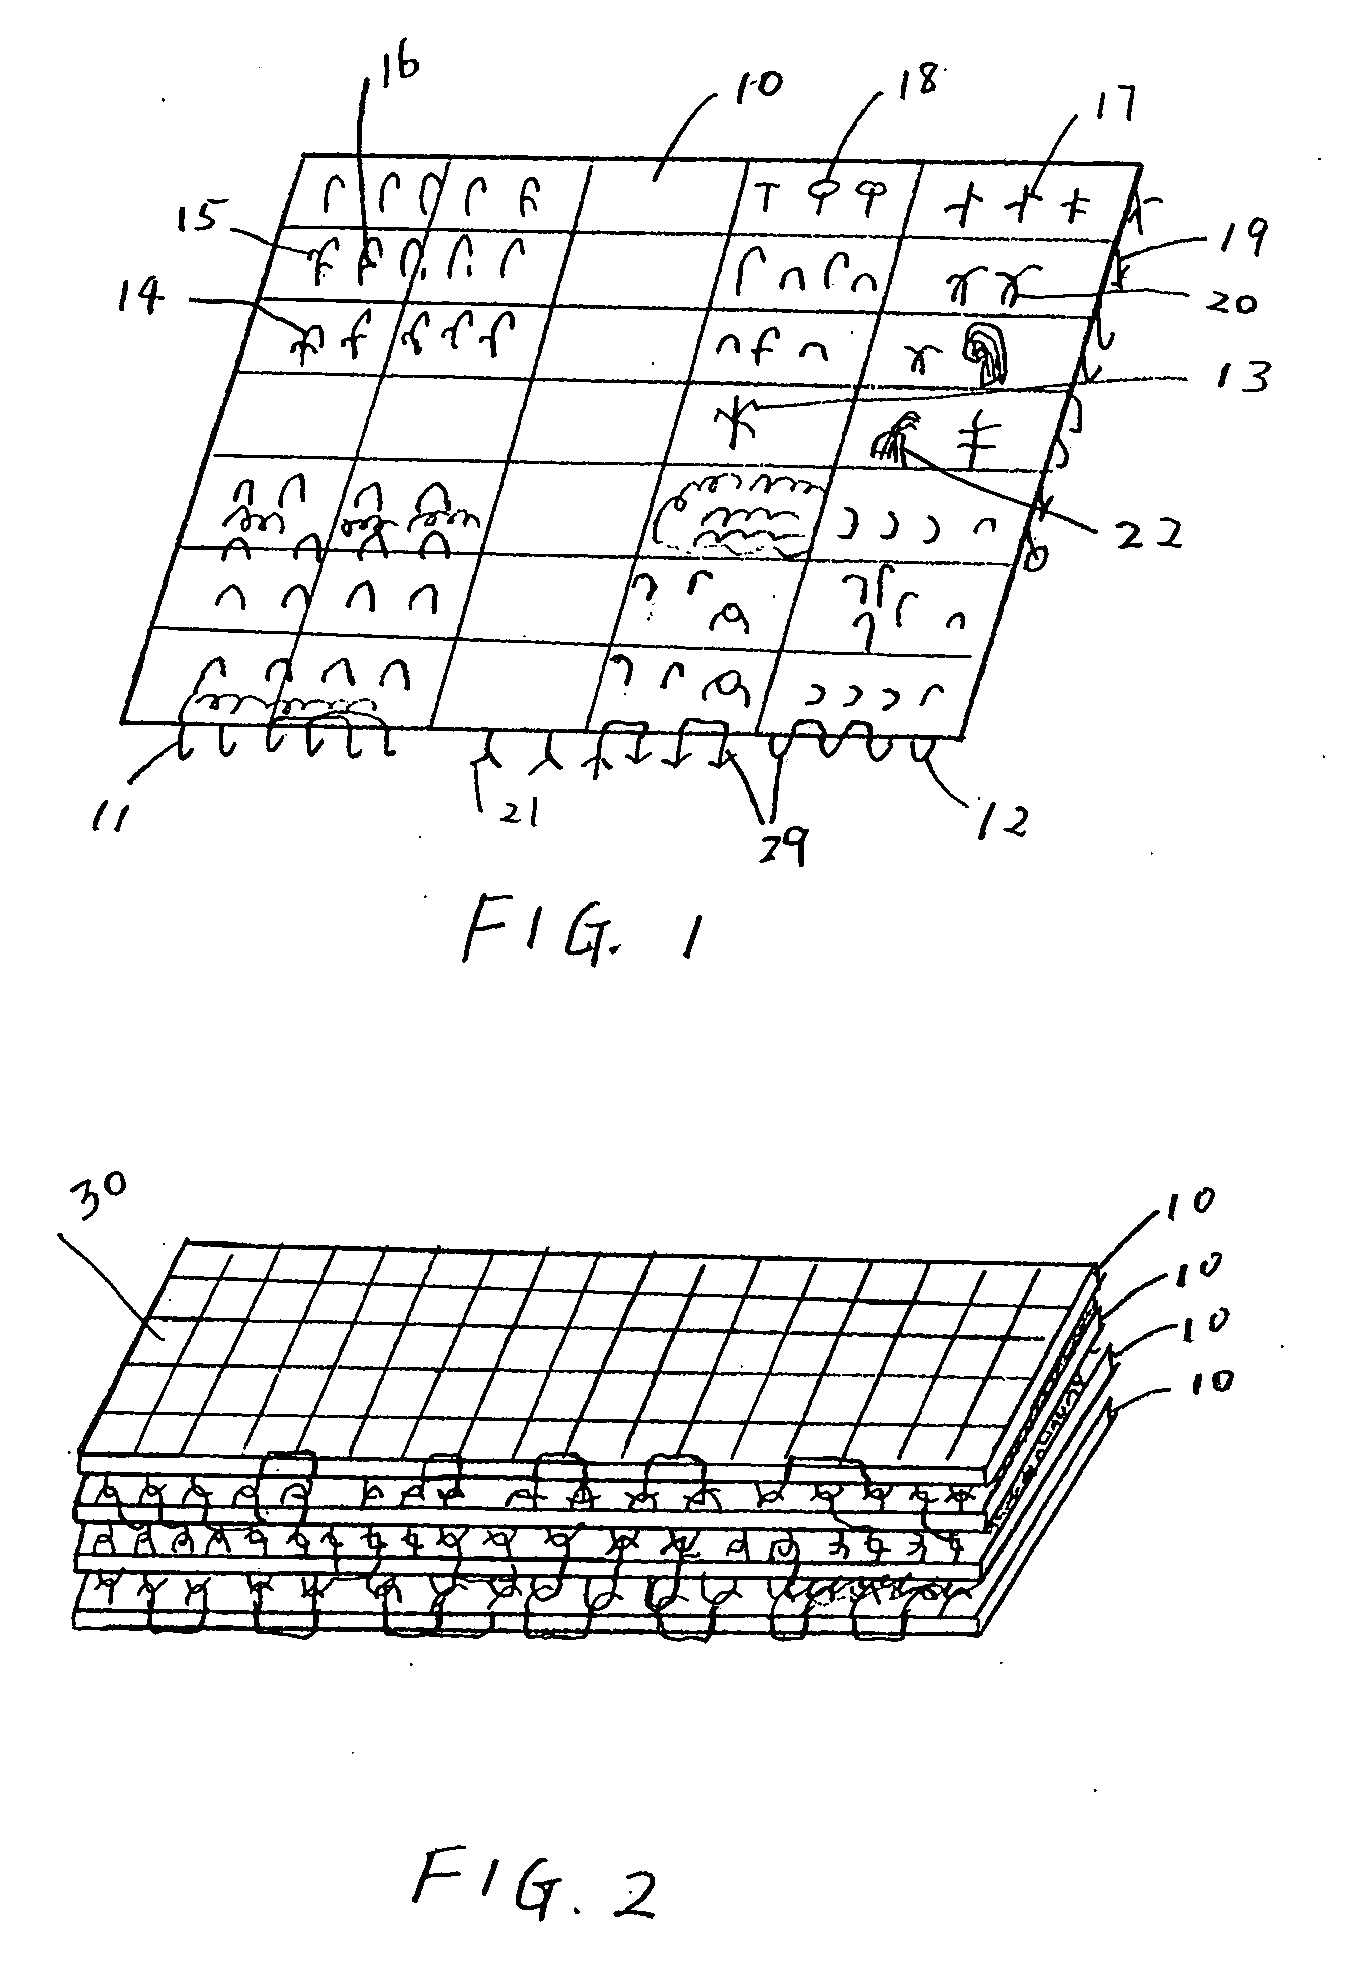 Fiber Products, Prepregs, Composites and Method of Producing Same